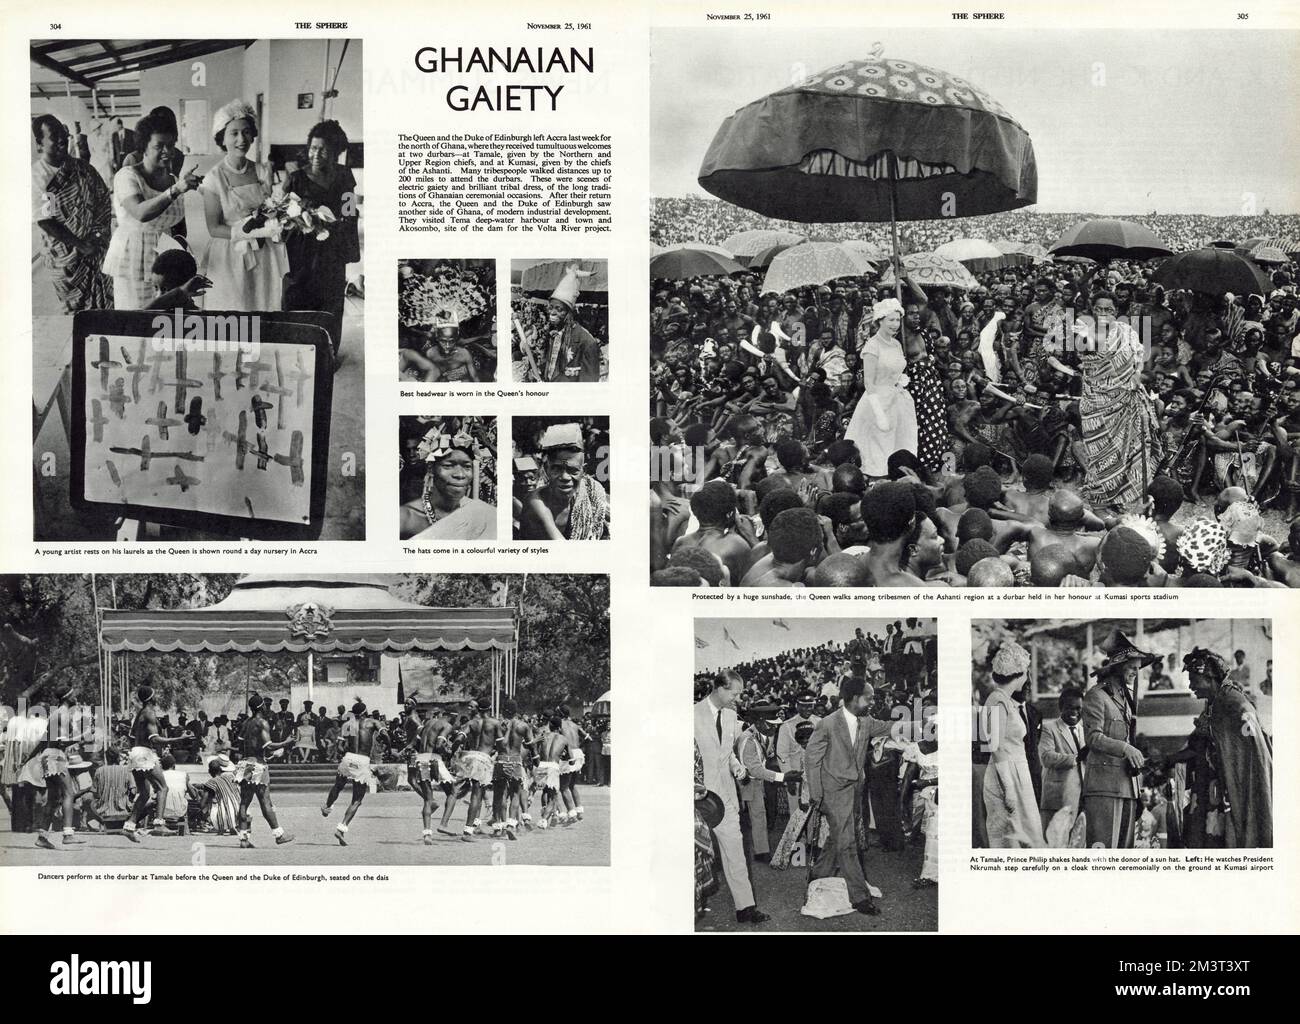 Double page spread from The Sphere reporting on the royal tour of Ghana in 1961, specifically the trip made by the Queen and Duke of Edinburgh to north Ghana, where durbars were held at both Tamale and Kumasi. Photographs show people in traditional headdresses and dancers at Tamale, as well as the royal couple walking among Ashanti tribesmen at Kumasi sports stadium. Stock Photo